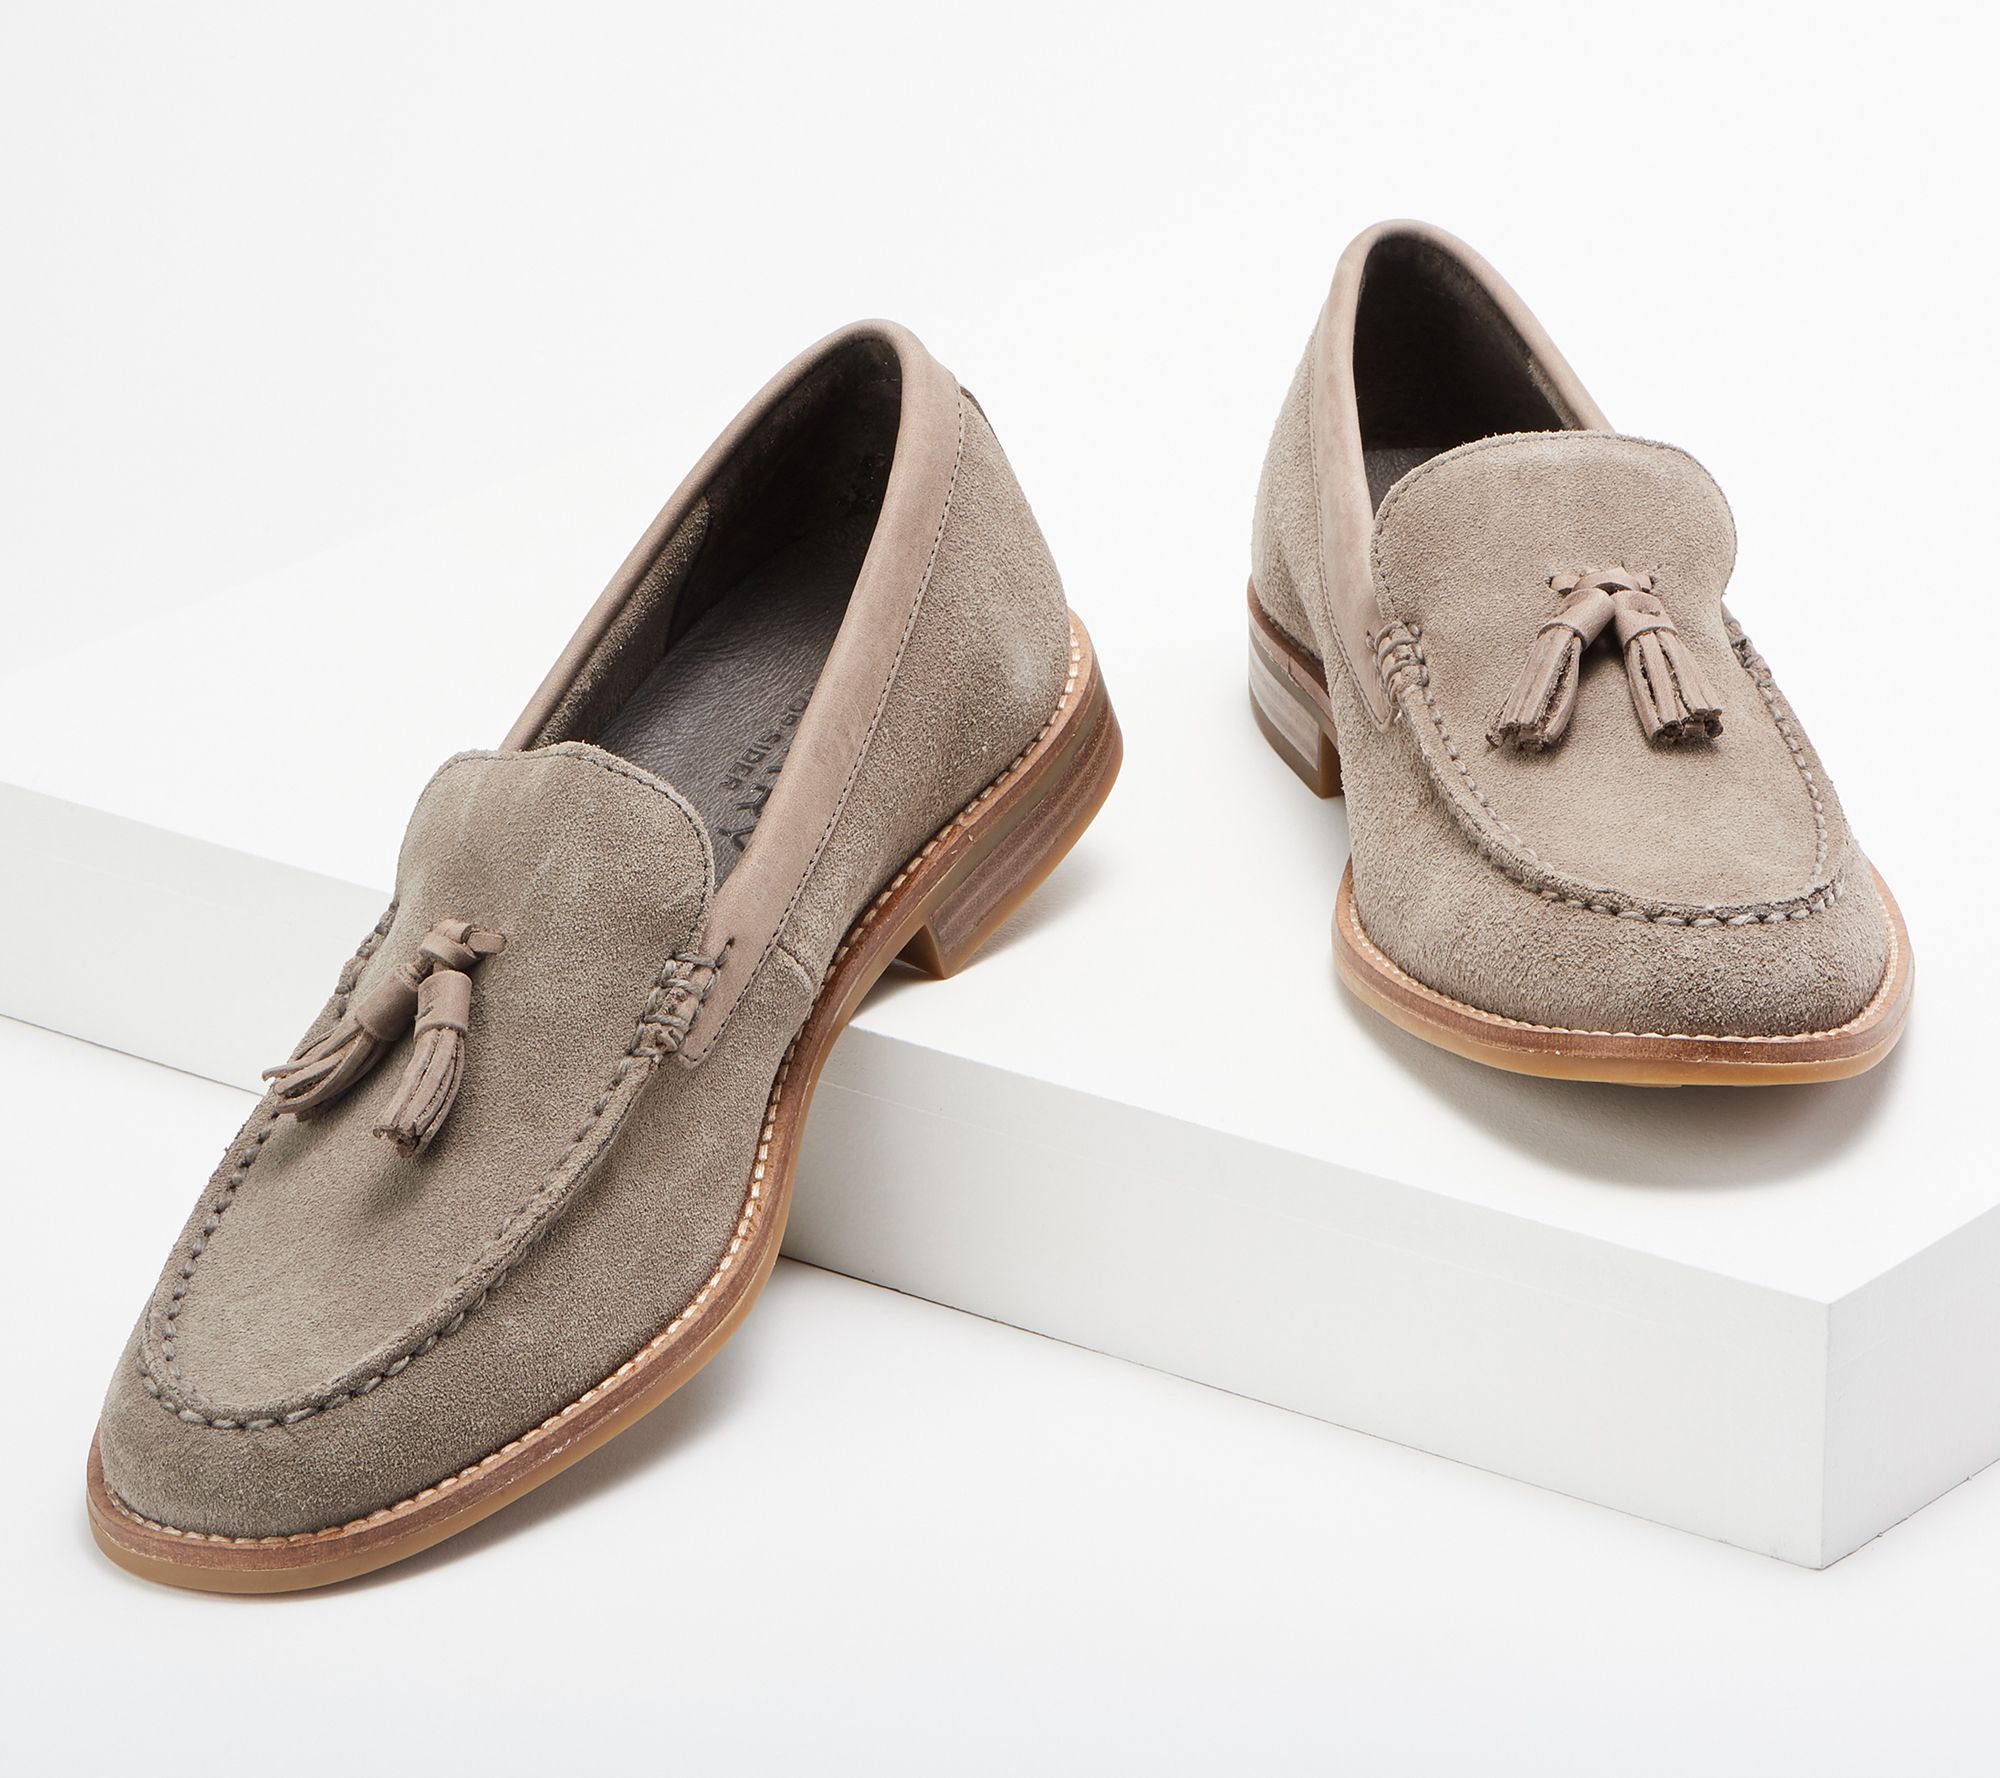 qvc sperry shoes